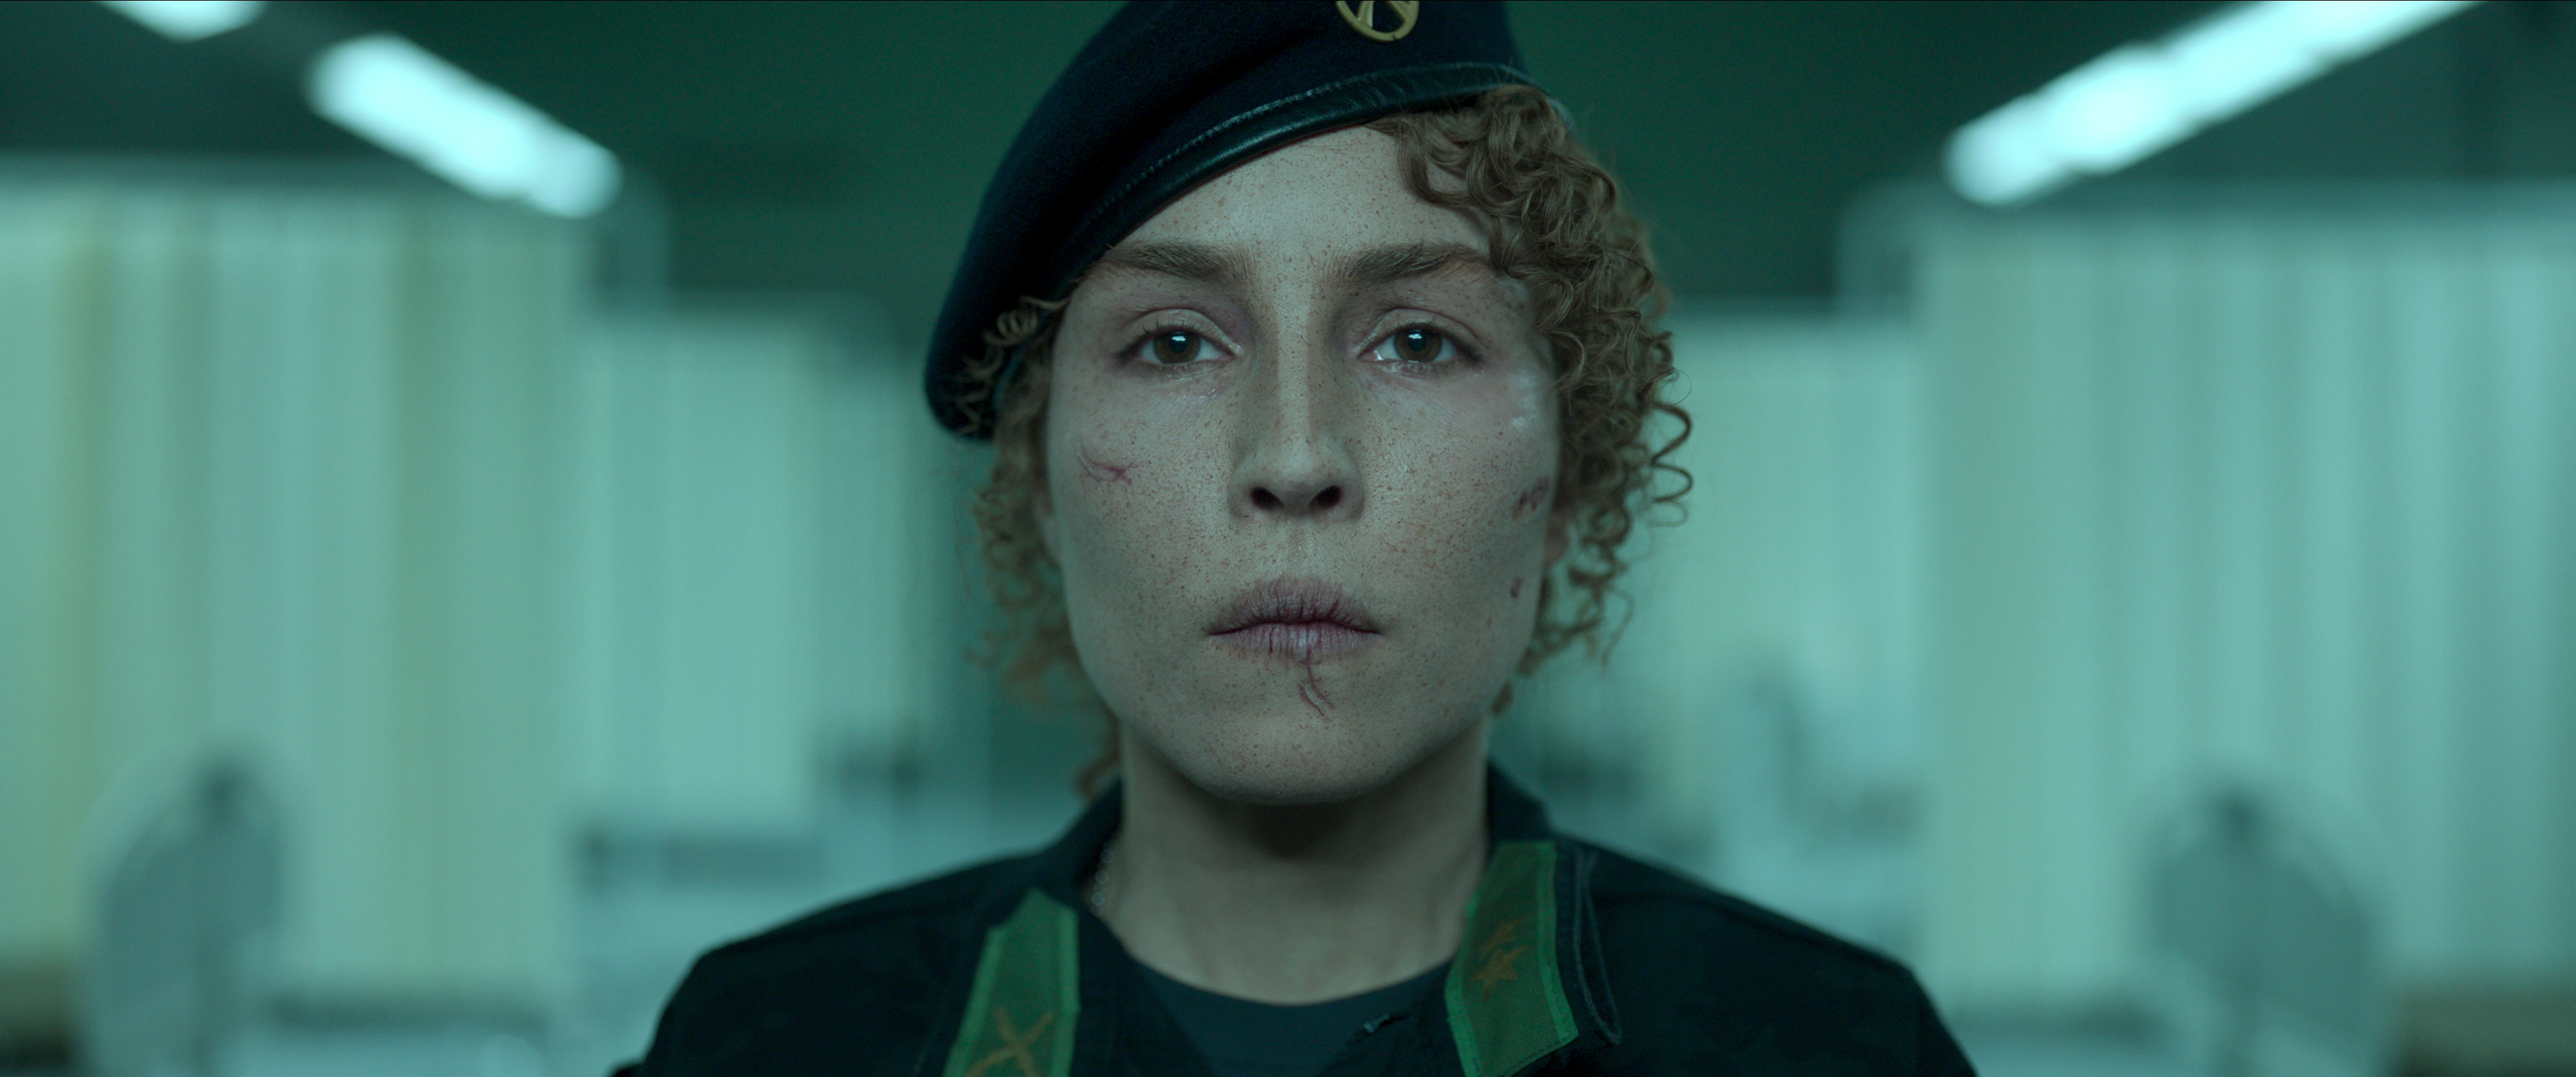 Noomi Rapace stares into the camera wearing military uniform